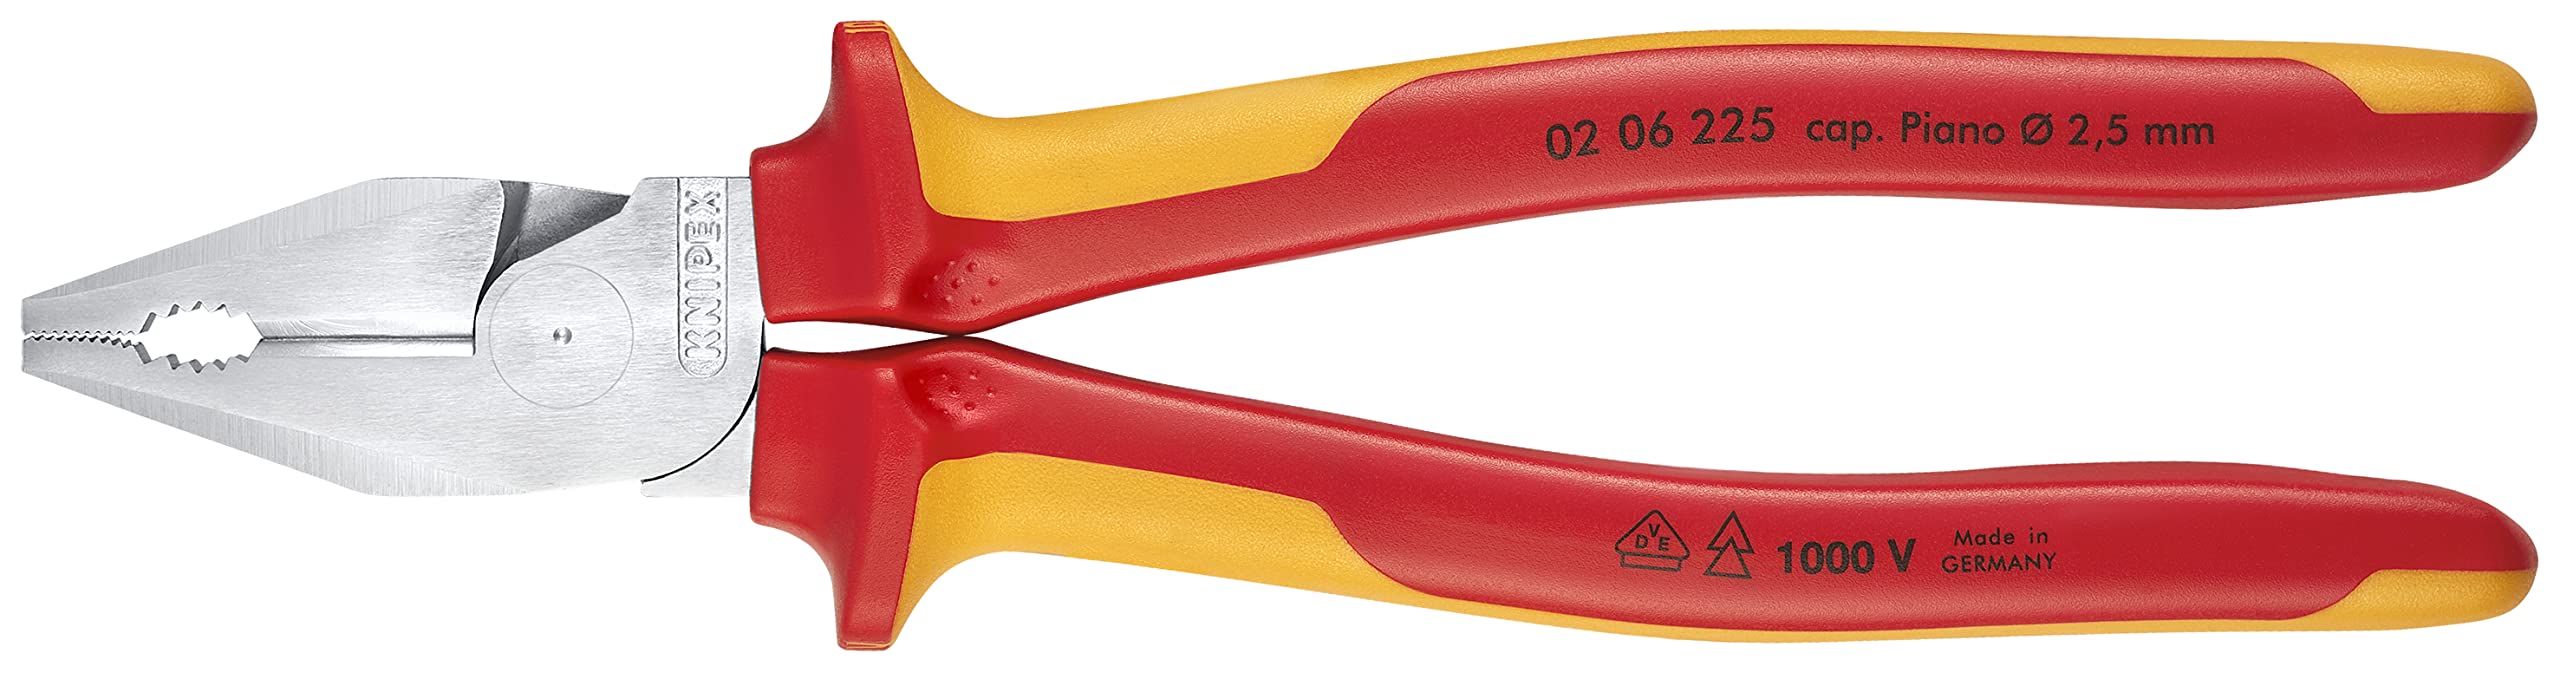 Knipex High Leverage Combination Pliers 1000V-insulated 225mm - 02 06 225